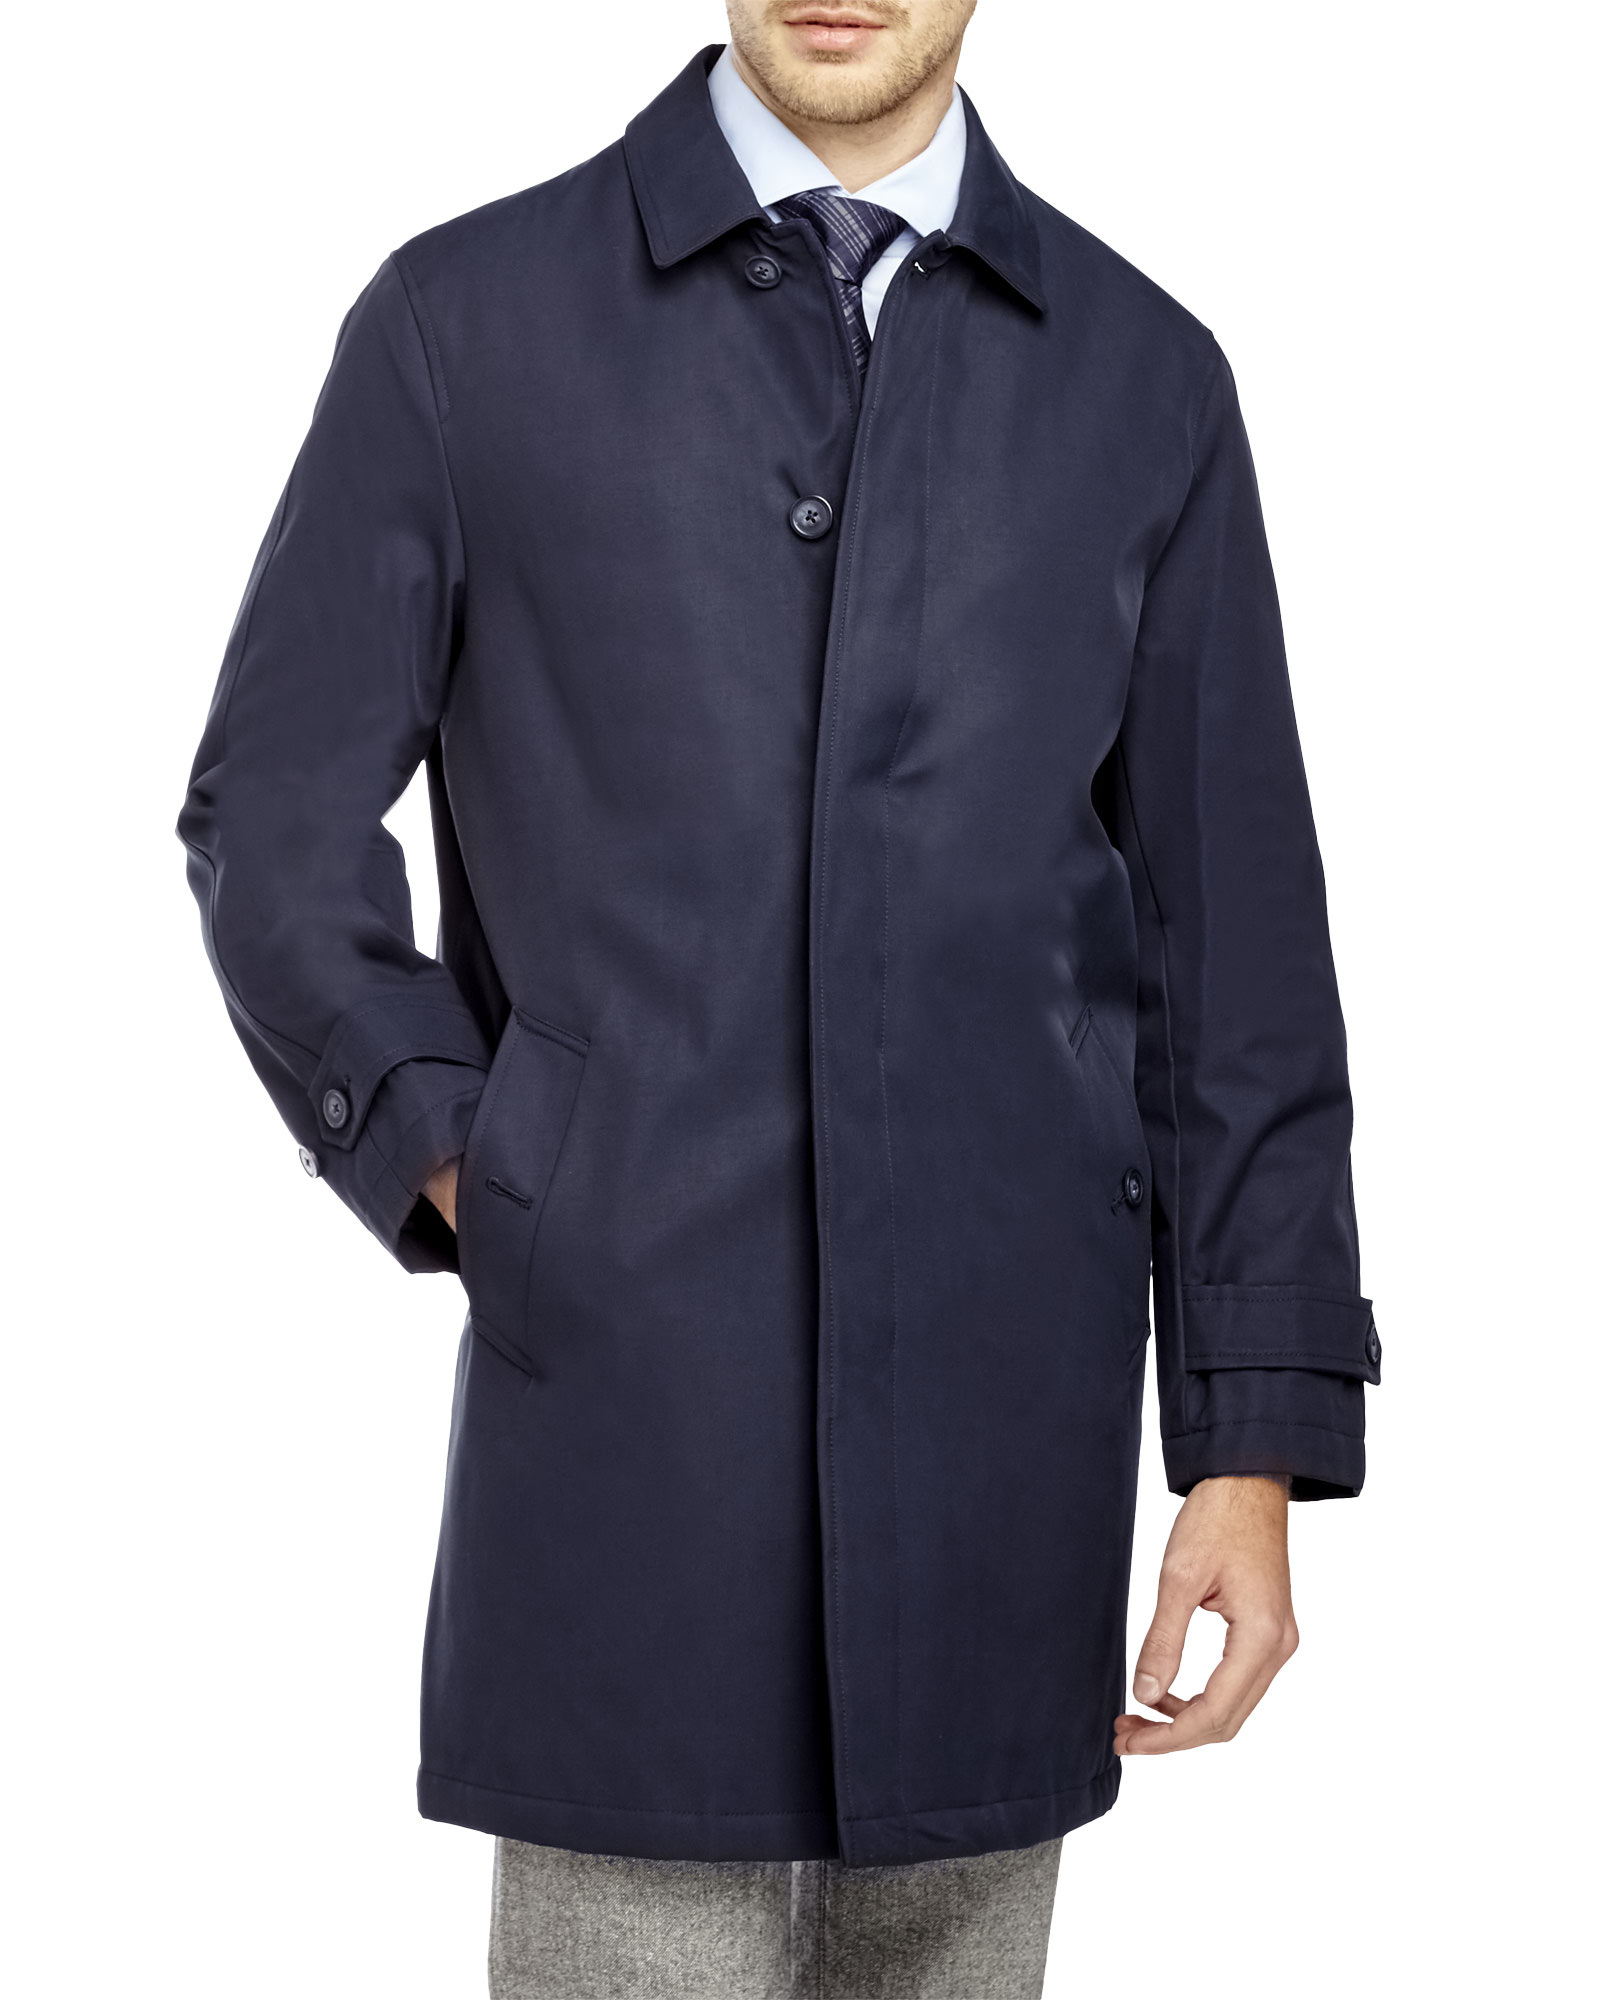 Lyst - Tommy Hilfiger Navy Leone Trench Coat in Blue for Men